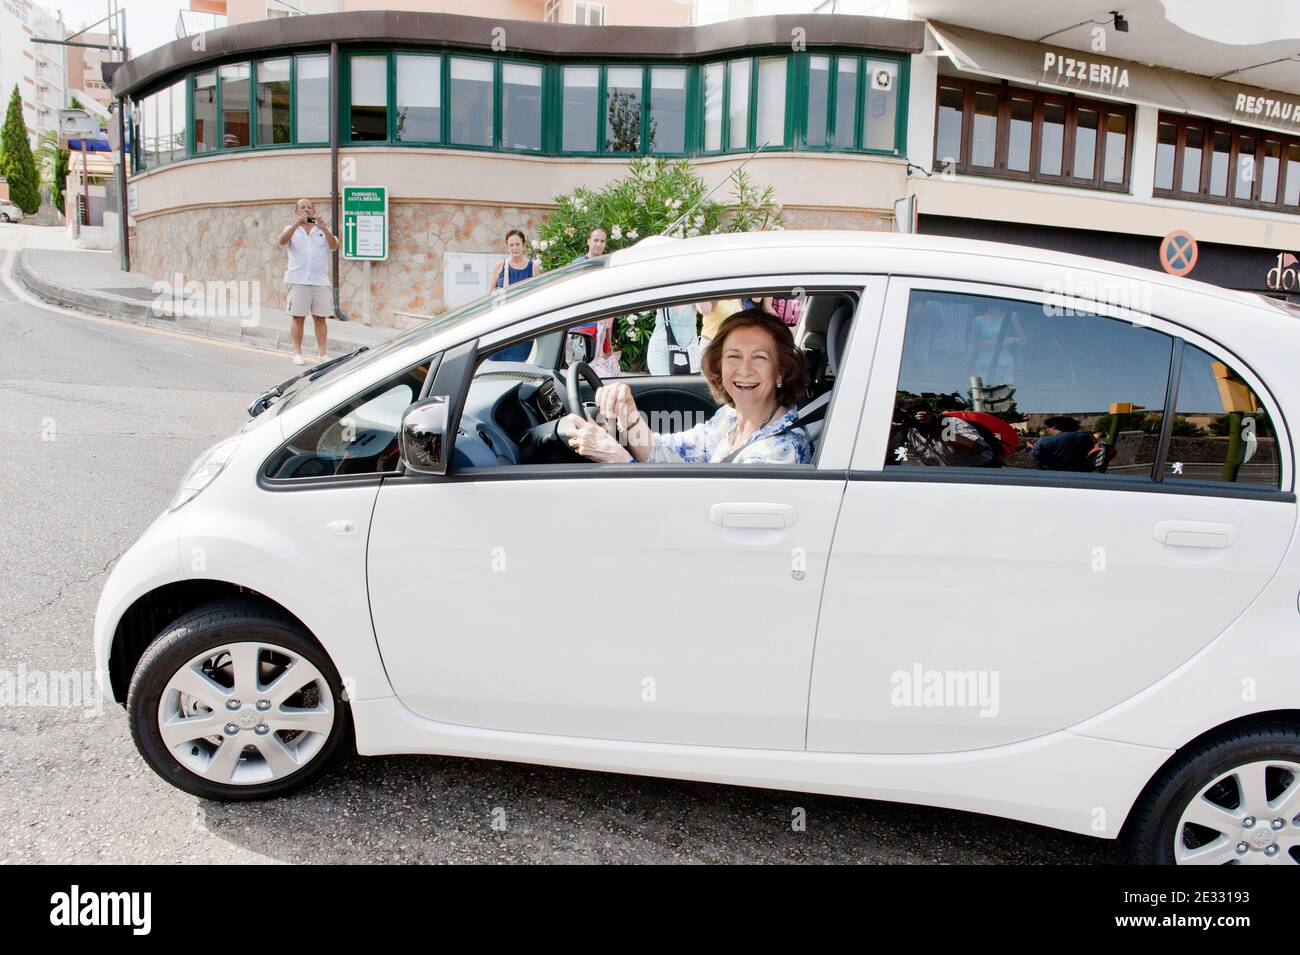 Spain's Queen Sofia drives a new electric car she just took delivery of, in Palma de Mallorca, Balearic Islands, Spain on August 11, 2010. The car, a Peugeot iON, has been lent to Queen SofÀa by the car company and was sent by air to Palma from Japan. The Queen will drive it for her private use for one month during her vacation at Marivent Palace on Mallorca. QueenæSofÀa has accepted the assignment as a show of support for electric cars as not pollutant vehicles respecting the environment. For security reasons the Queen was followed by two larger dark cars carrying her security detail. Photo b Stock Photo